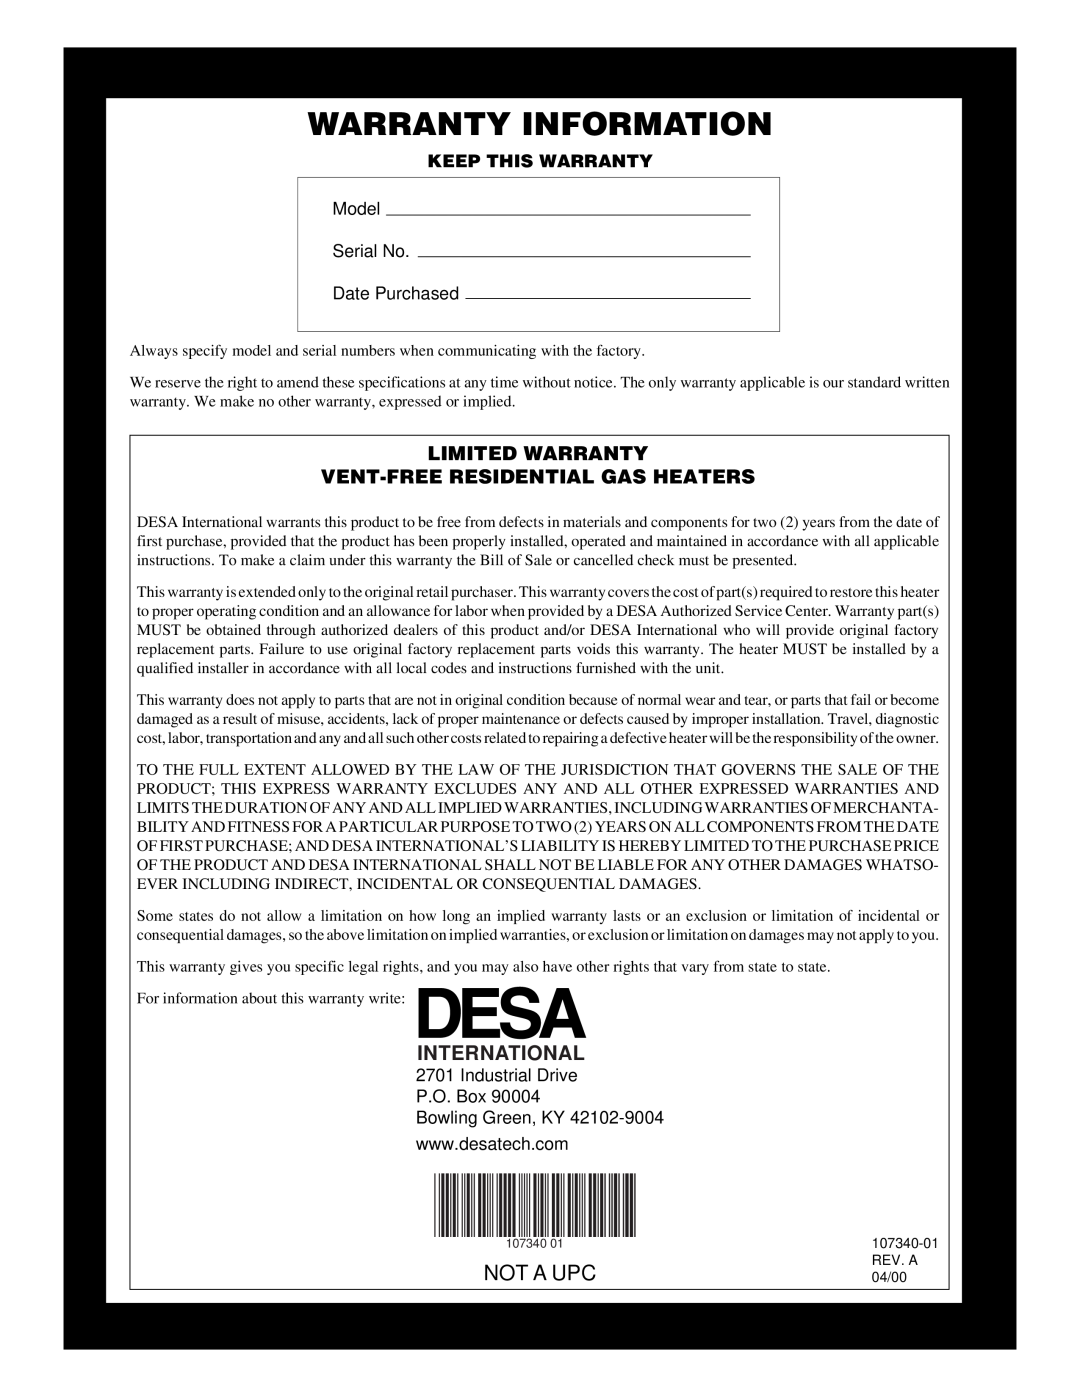 Desa FGHS30NGB Limited Warranty Vent-Freeresidential Gas Heaters, International, Warranty Information, Not A Upc 